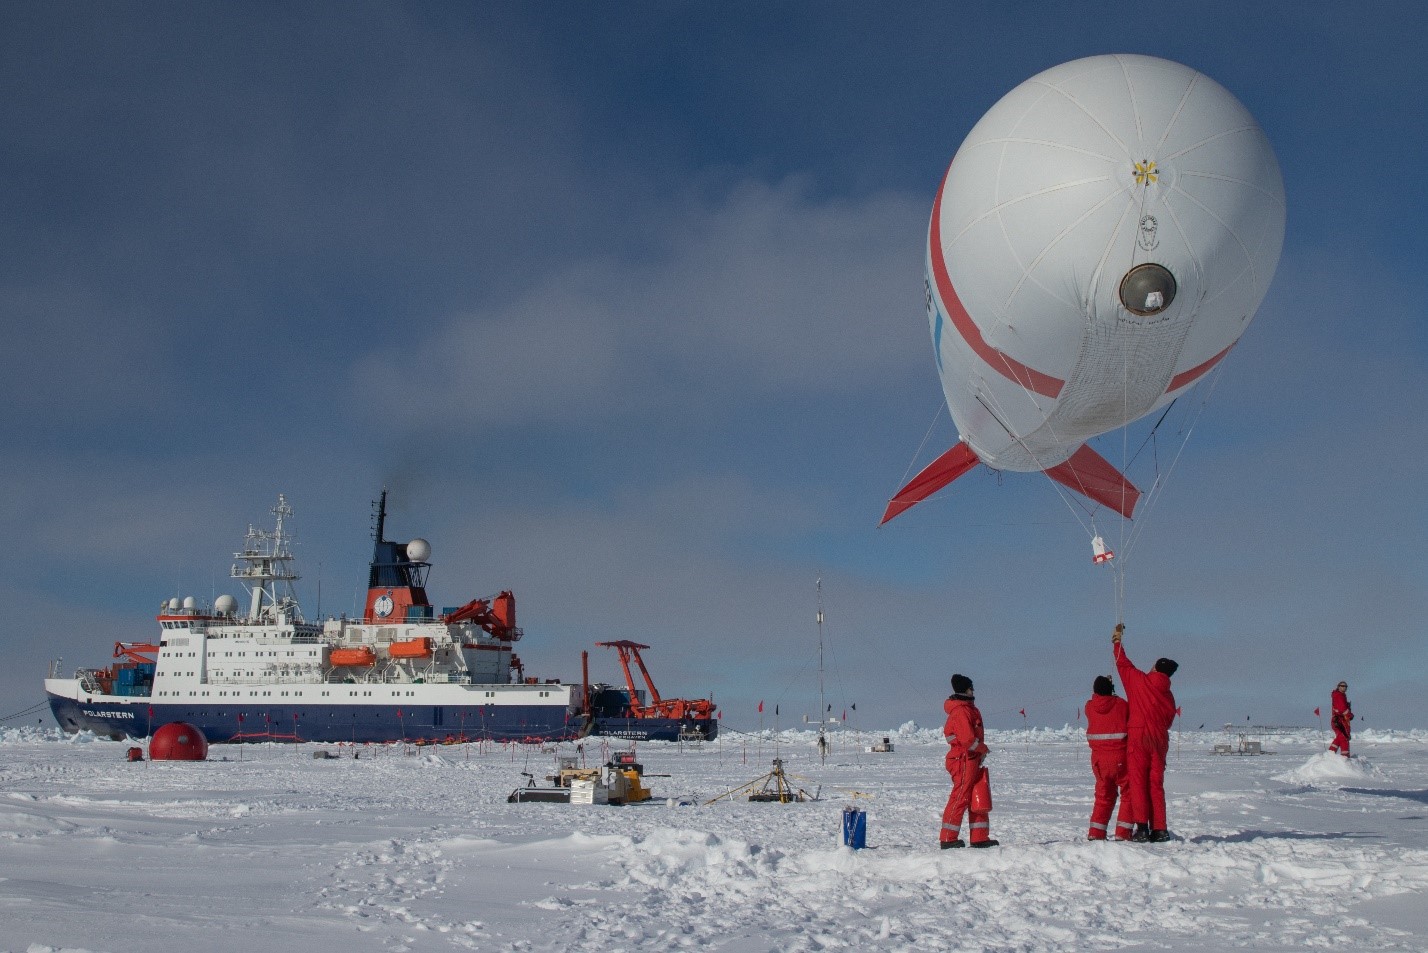 Polarstern research icebreaker on a mission